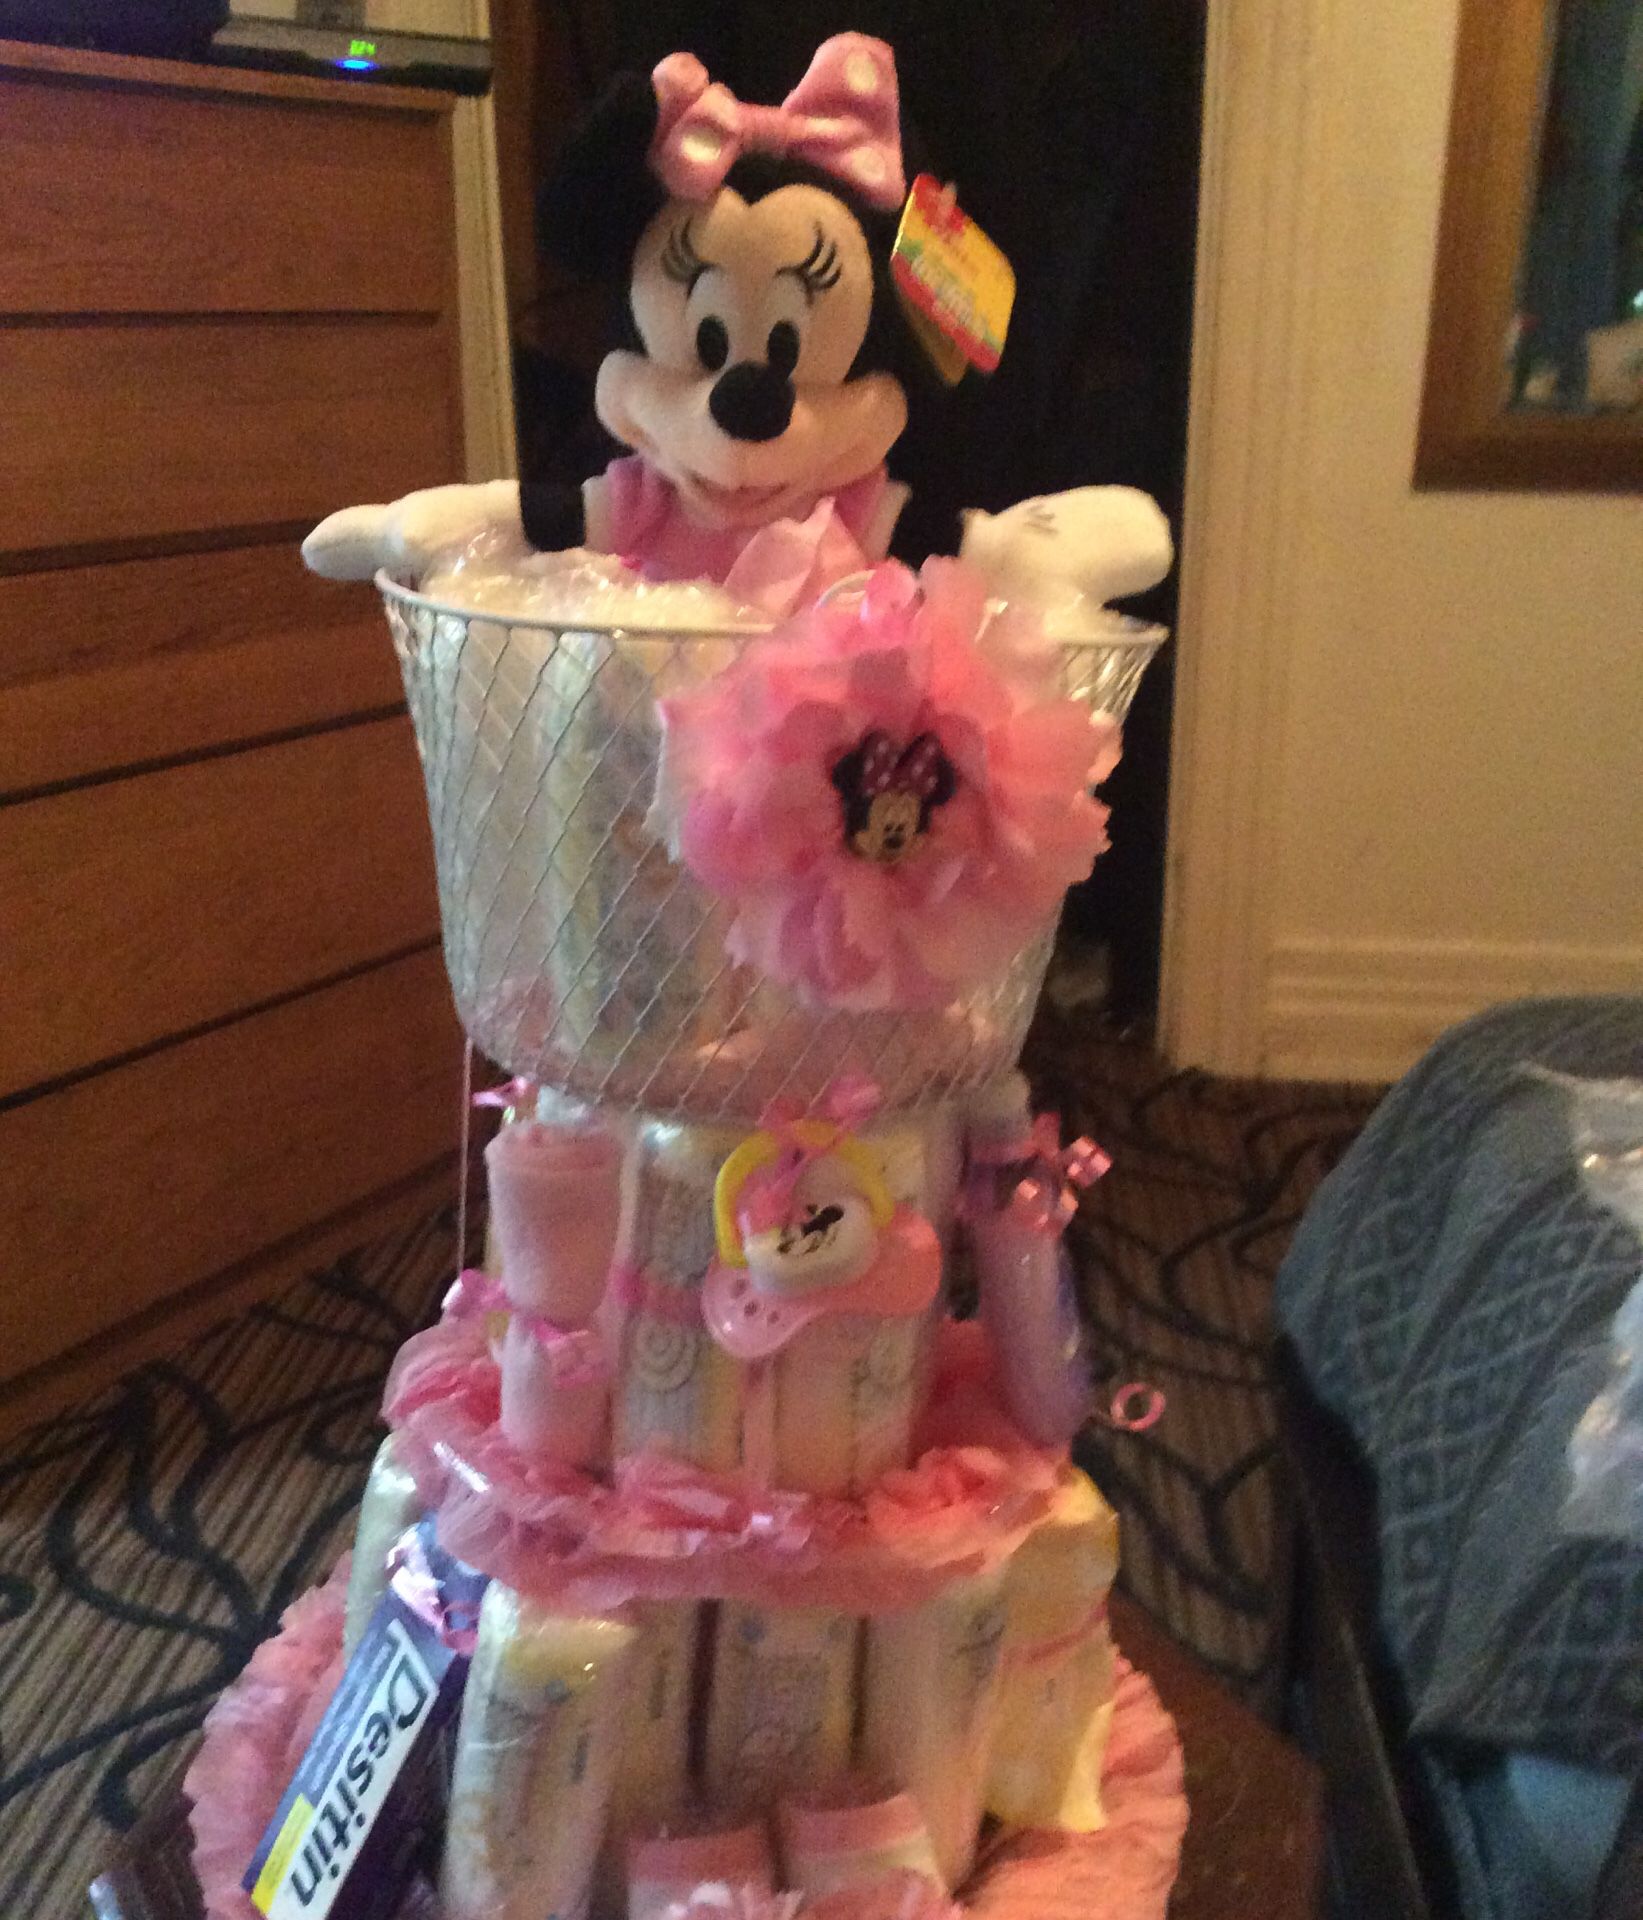 New Huge Minnie Mouse Diaper Cake For a Girl